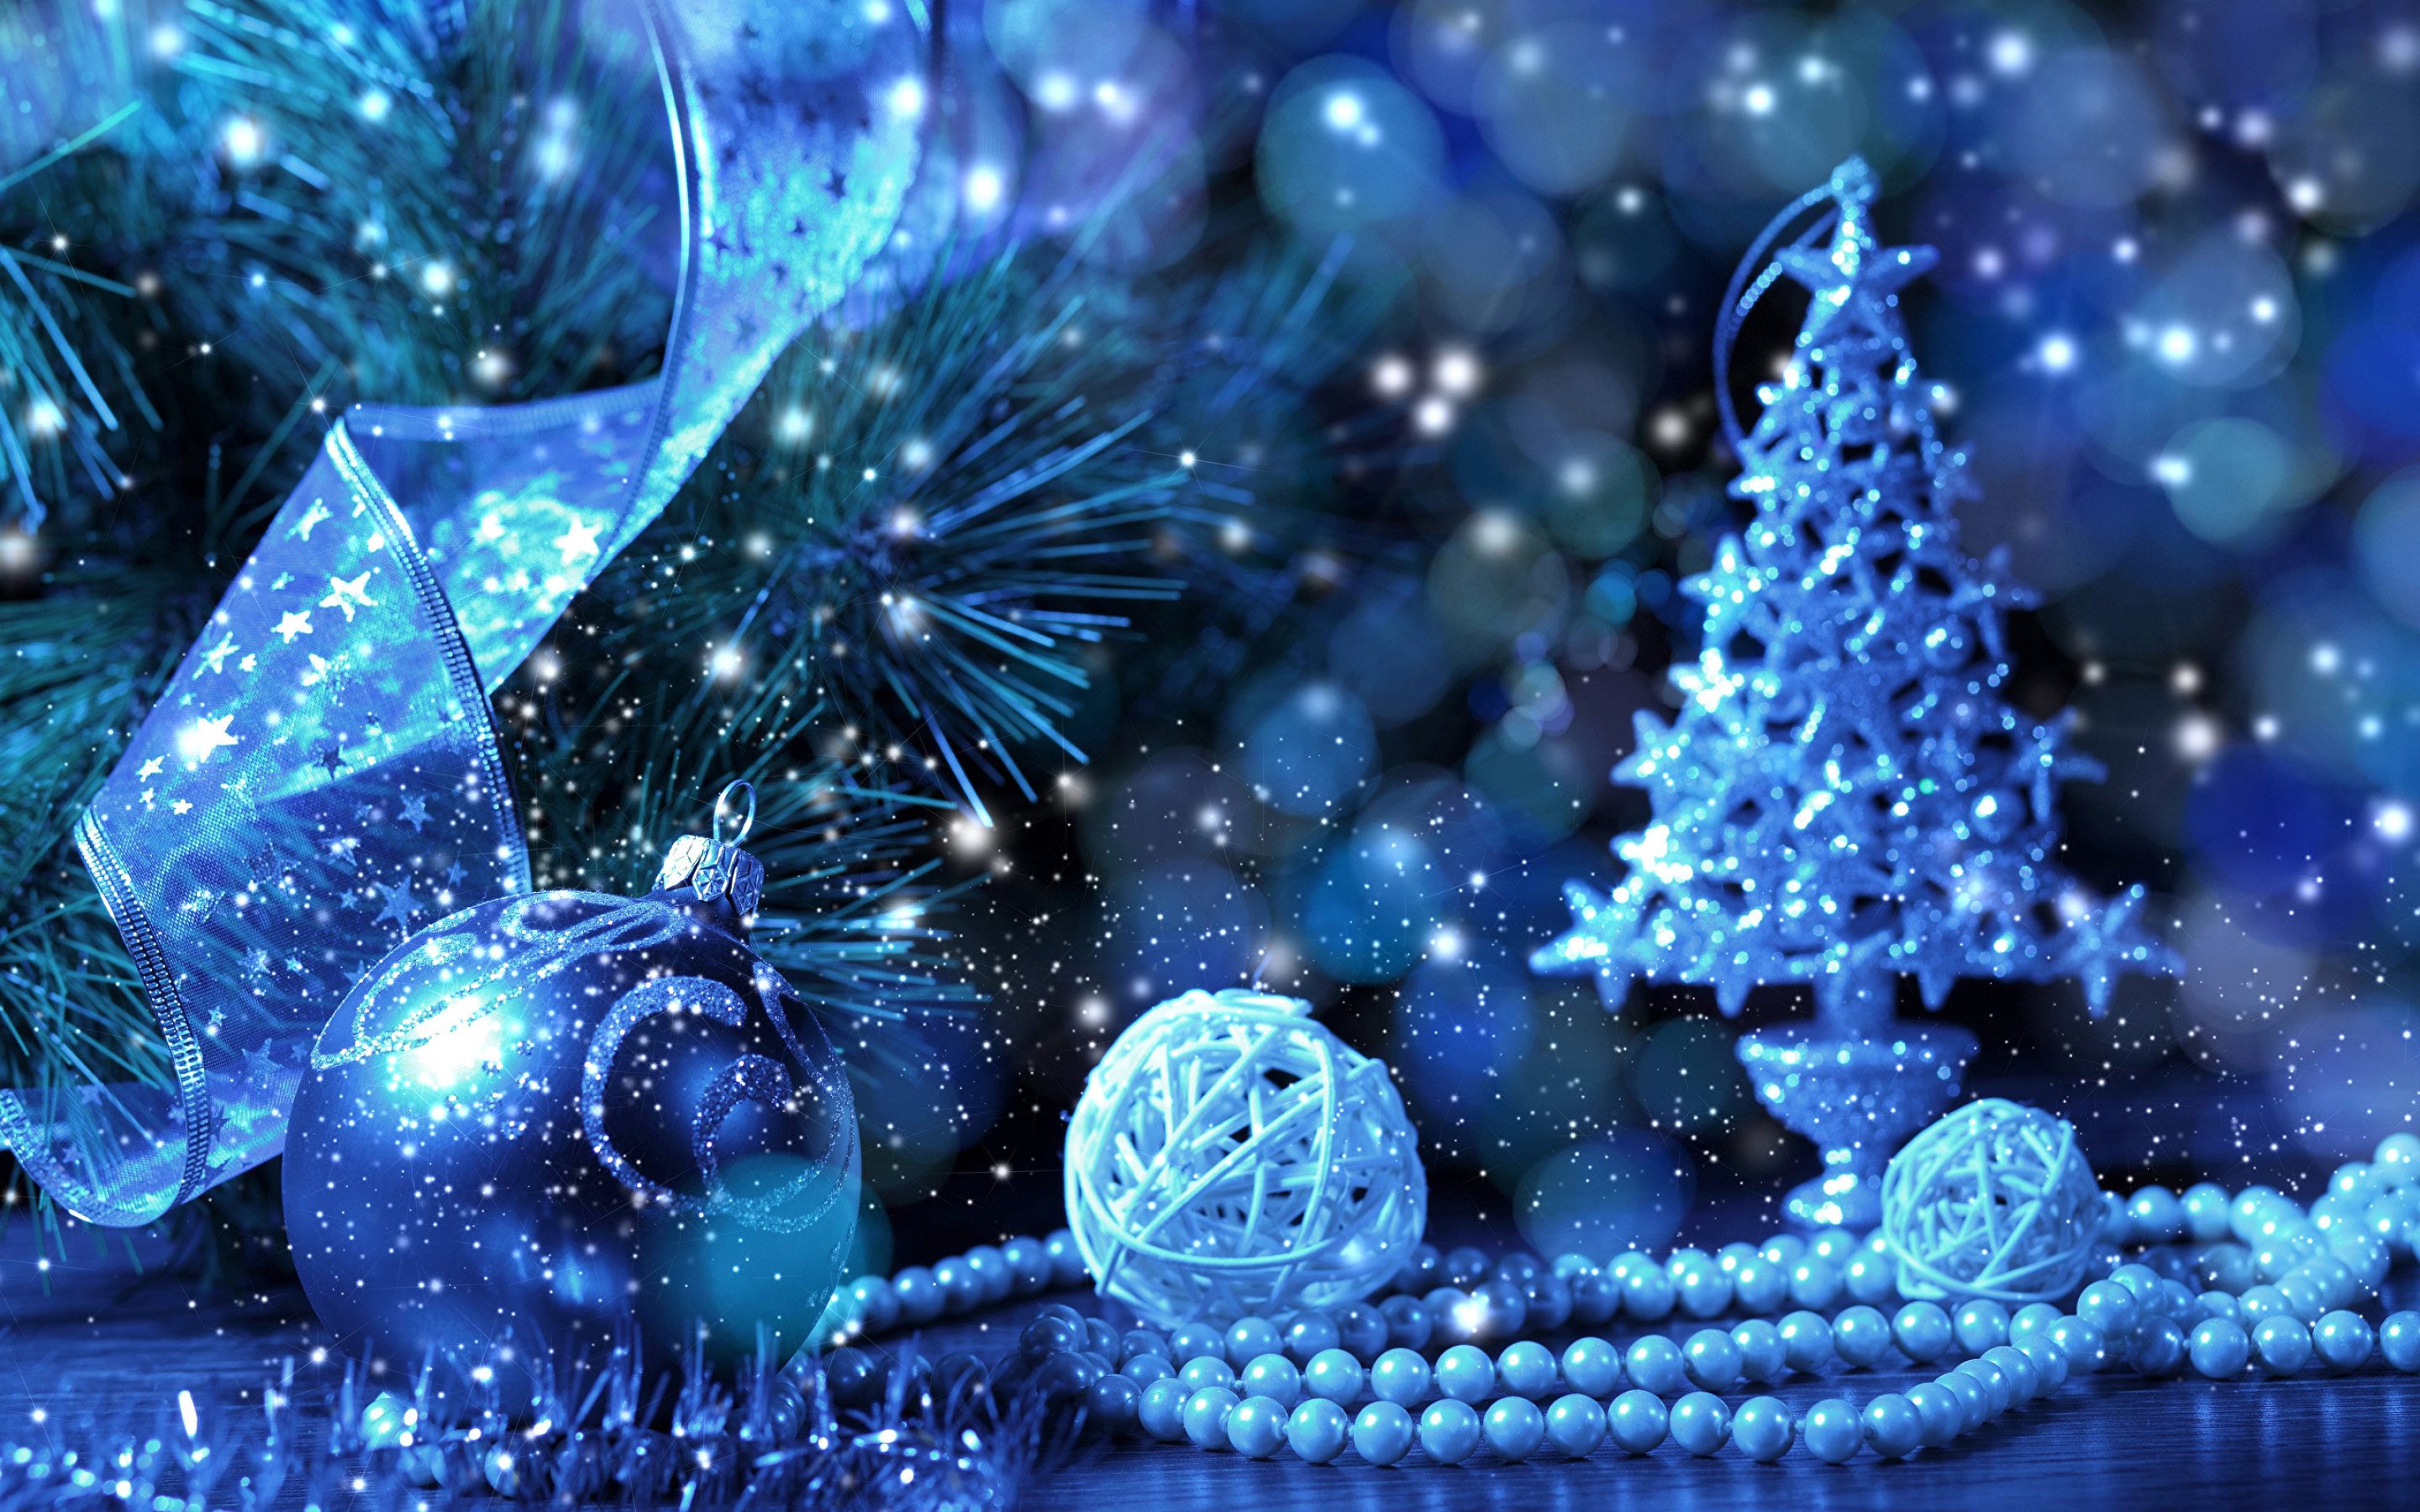 Download wallpapers blue christmas tree, 4k, Merry Christmas, blue christmas  background, new year decorations, candles, Happy New Year, christmas  decorations, christmas tree, New Years concerts, xmas decorations for  desktop with resolution 2880x1800.